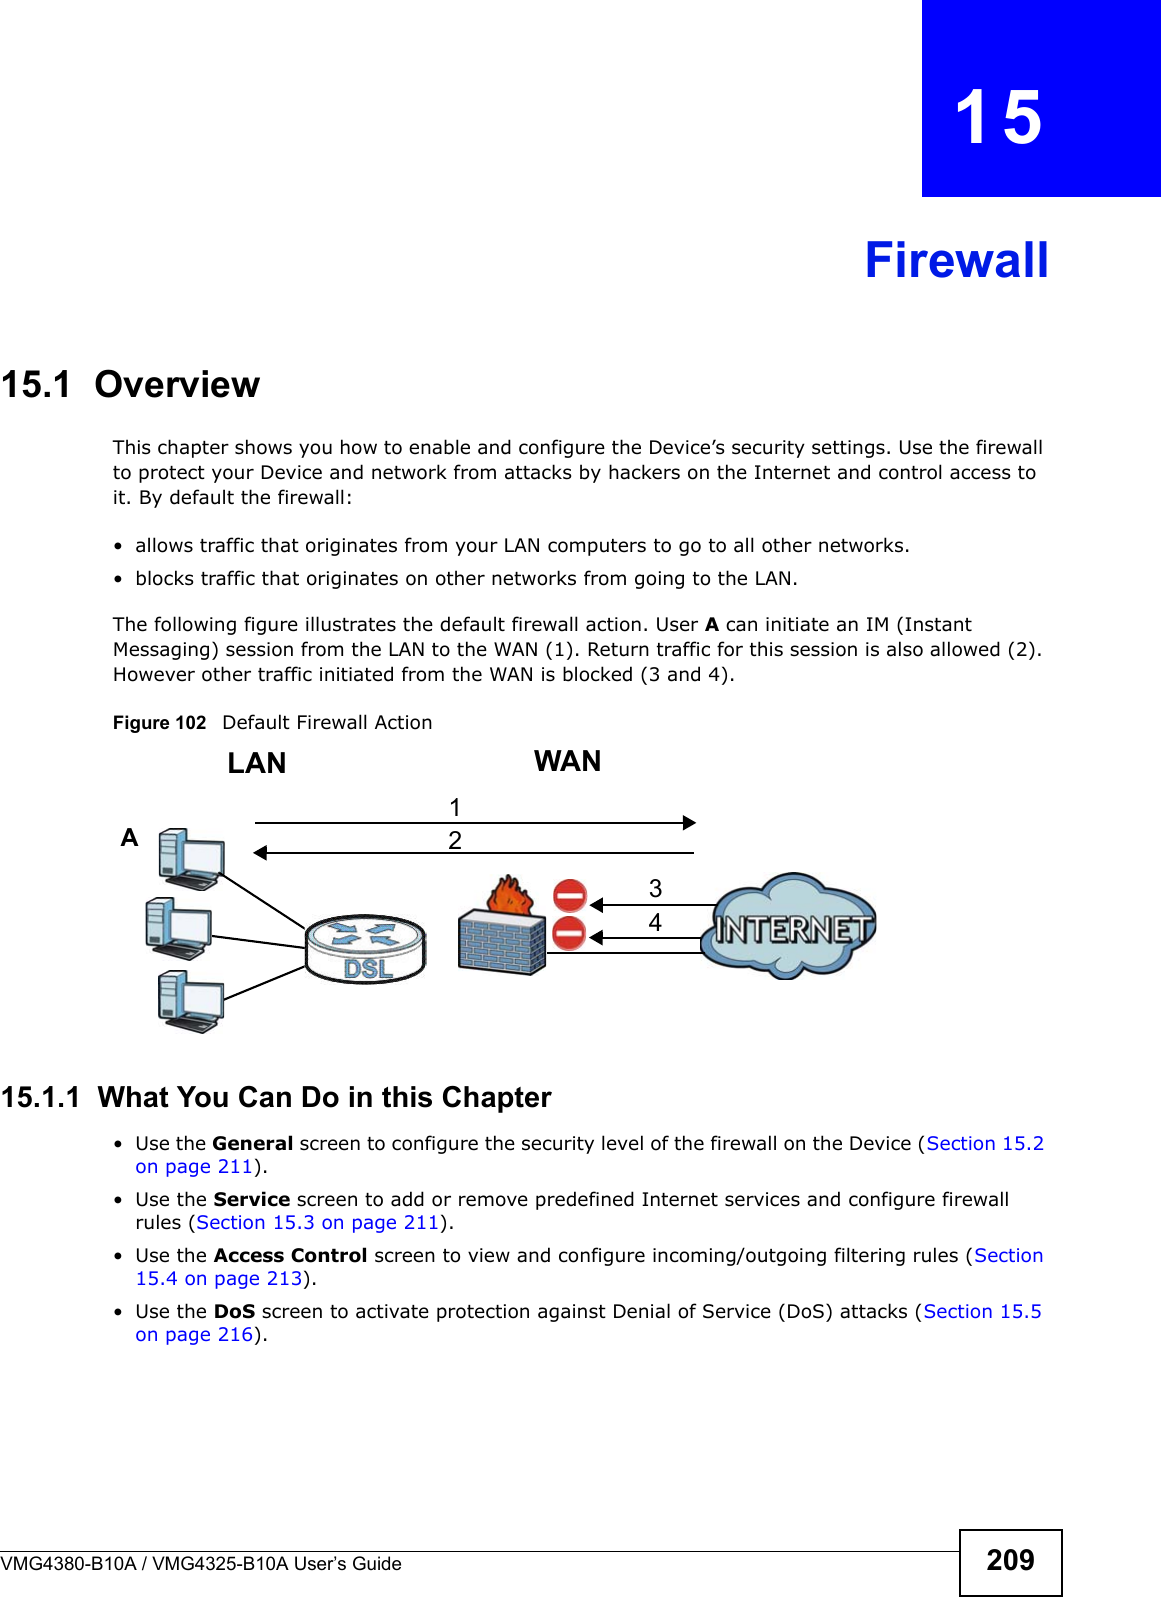 VMG4380-B10A / VMG4325-B10A User’s Guide 209CHAPTER  15Firewall15.1  OverviewThis chapter shows you how to enable and configure the Device’s security settings. Use the firewall to protect your Device and network from attacks by hackers on the Internet and control access to it. By default the firewall:• allows traffic that originates from your LAN computers to go to all other networks. • blocks traffic that originates on other networks from going to the LAN. The following figure illustrates the default firewall action. User A can initiate an IM (Instant Messaging) session from the LAN to the WAN (1). Return traffic for this session is also allowed (2). However other traffic initiated from the WAN is blocked (3 and 4).Figure 102   Default Firewall Action15.1.1  What You Can Do in this Chapter• Use the General screen to configure the security level of the firewall on the Device (Section 15.2 on page 211).• Use the Service screen to add or remove predefined Internet services and configure firewall rules (Section 15.3 on page 211).• Use the Access Control screen to view and configure incoming/outgoing filtering rules (Section 15.4 on page 213). • Use the DoS screen to activate protection against Denial of Service (DoS) attacks (Section 15.5on page 216).WANLAN3412A